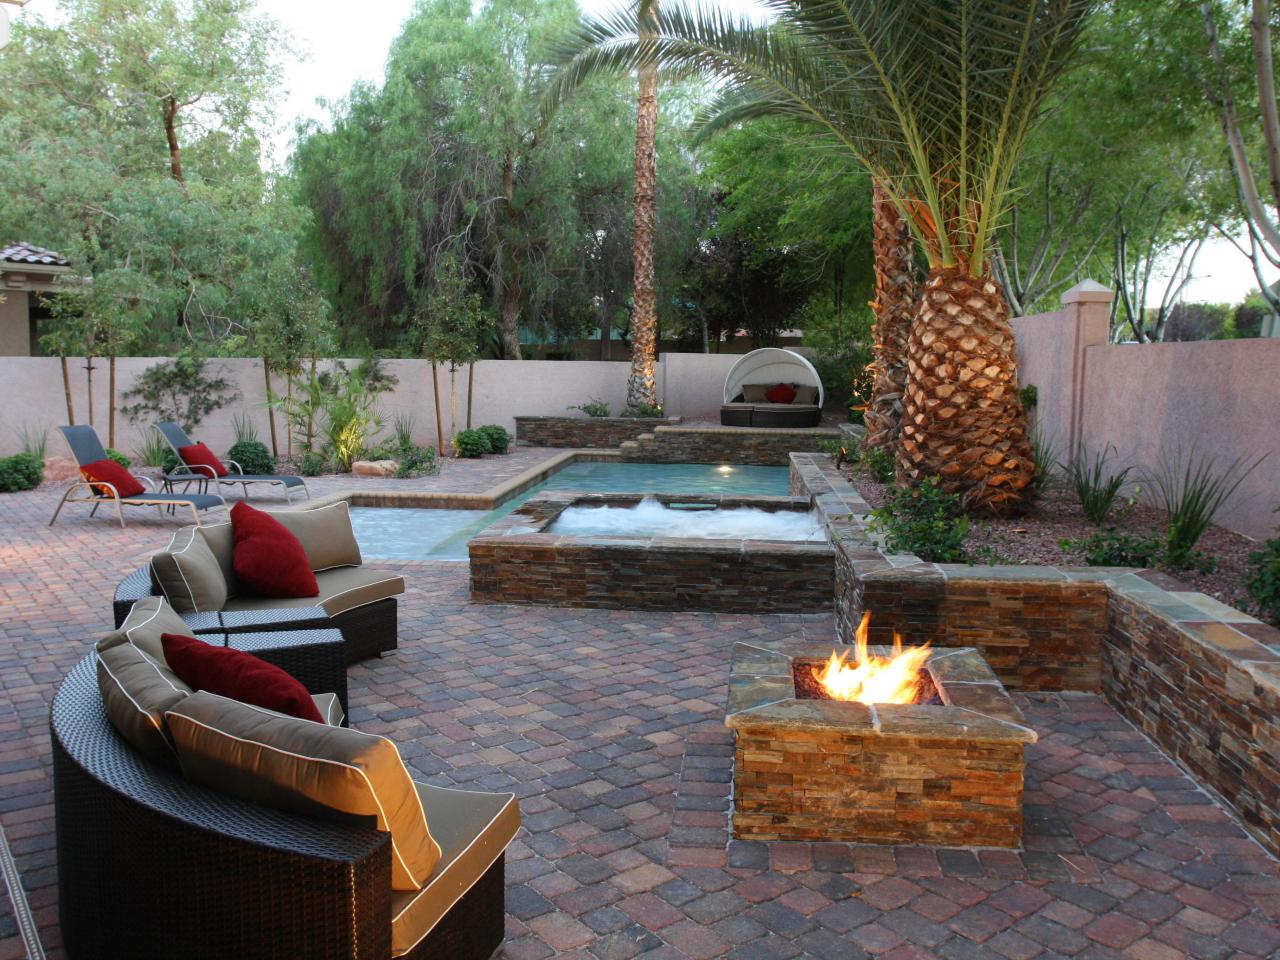 Stone Patio with Pool and Fire Pit | HGTV